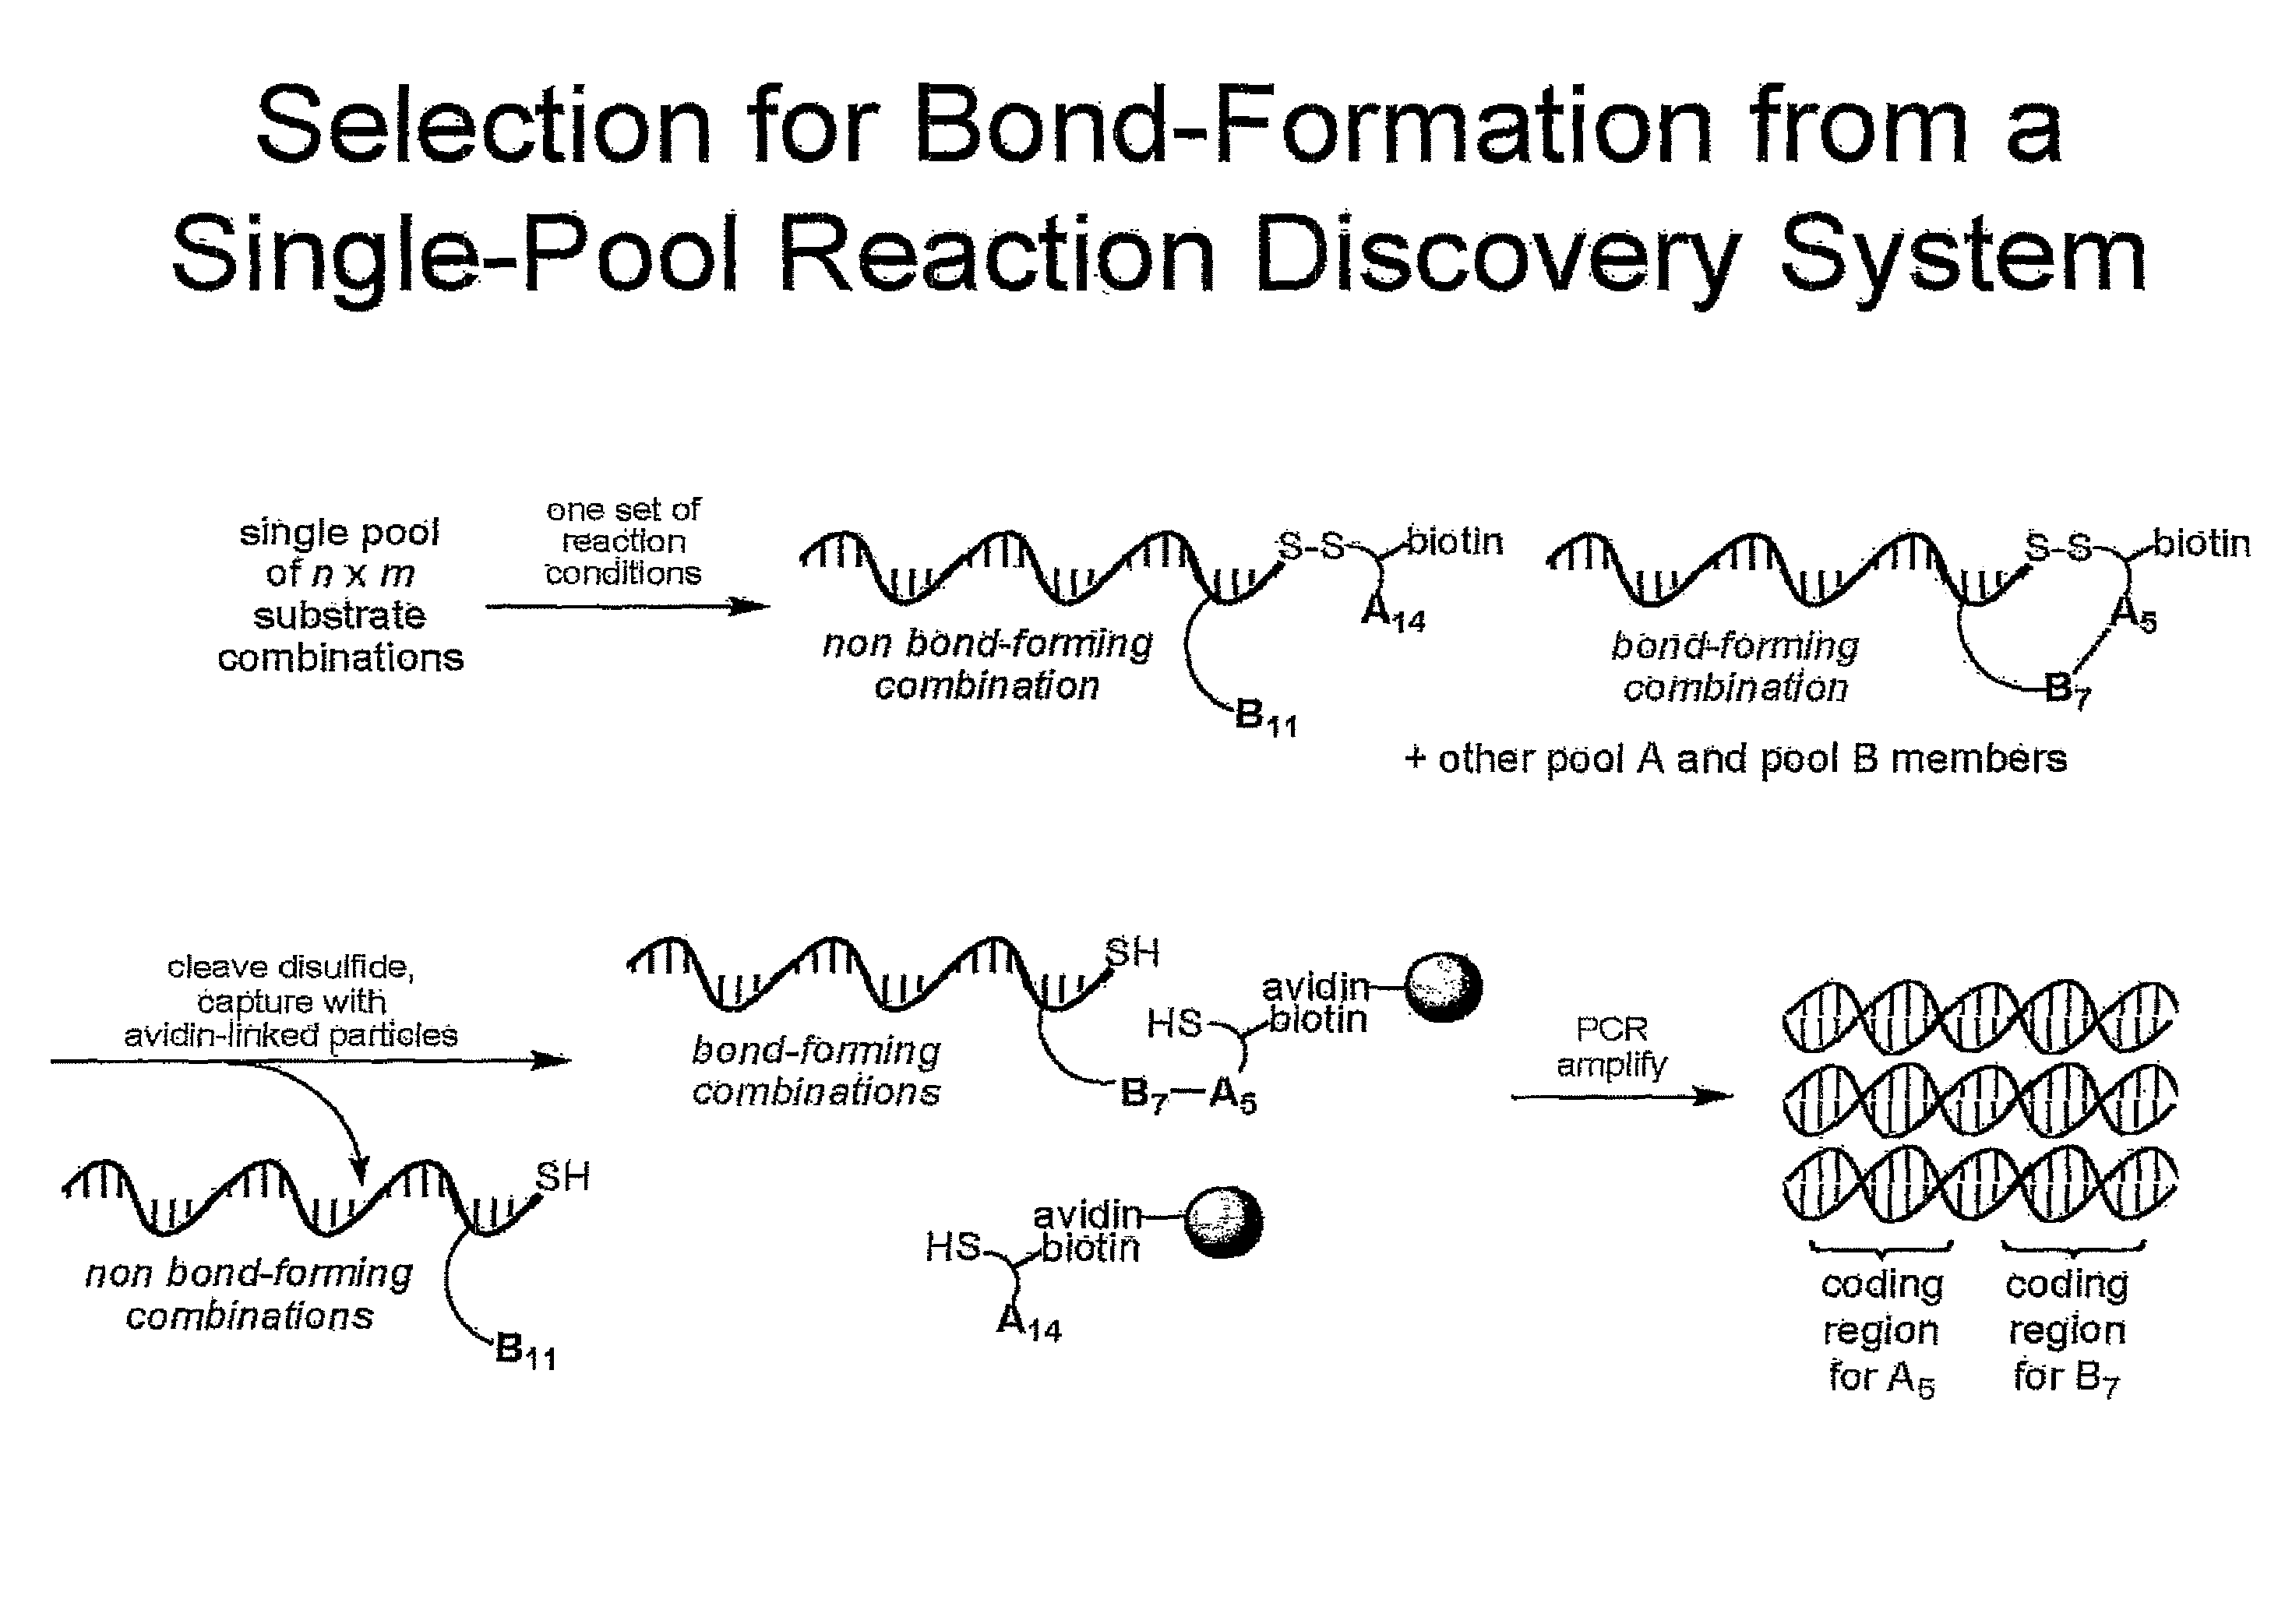 Reaction discovery system